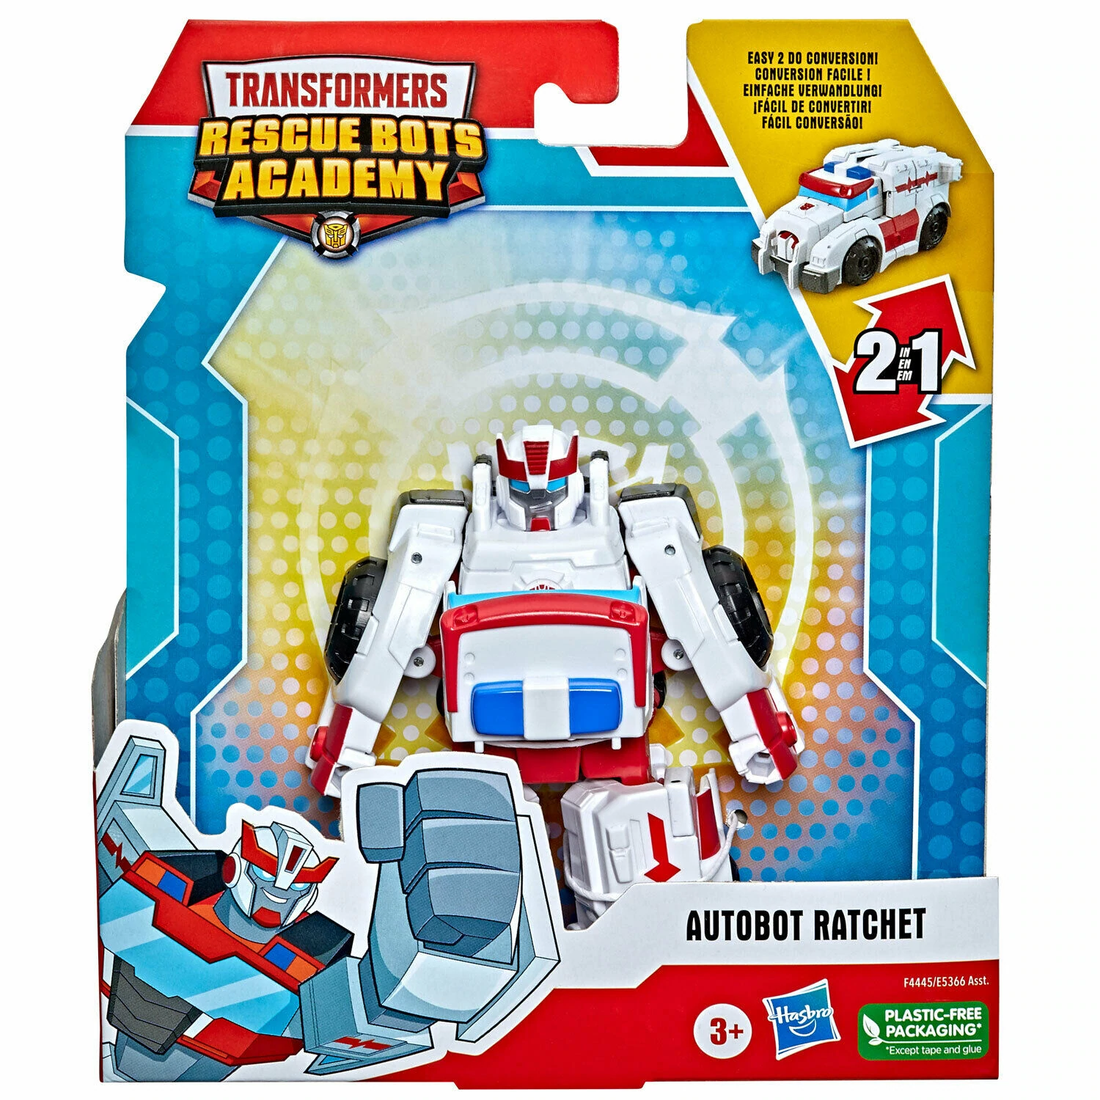 Transformers Rescue Bots Academy: Dynamic Duo Variation Toys - AUTOBOT RATCHET